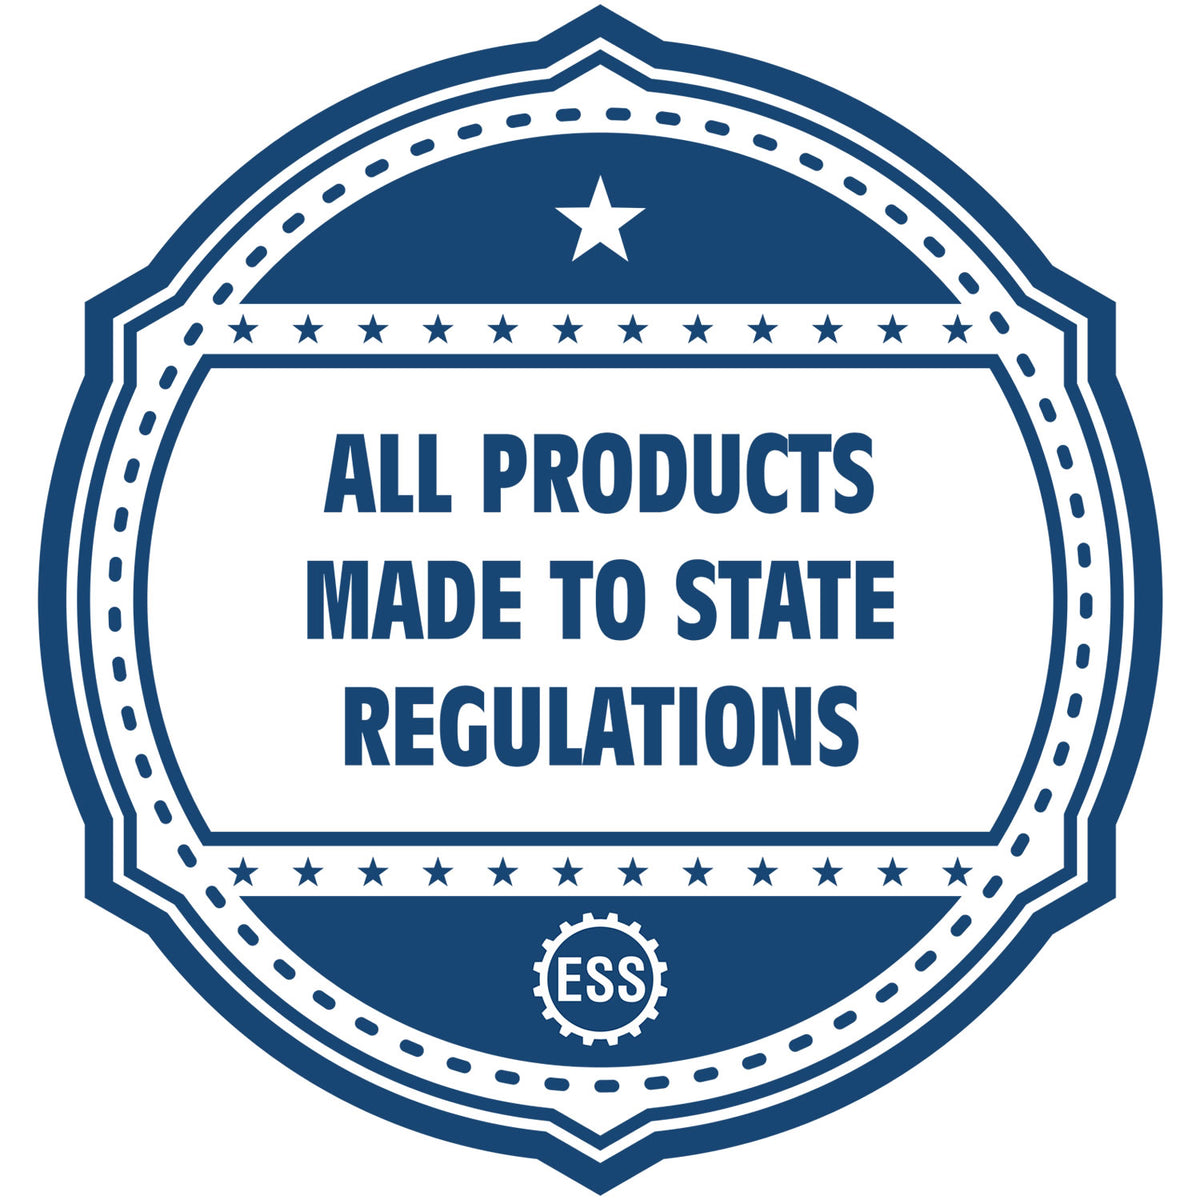 A blue icon or badge for the Gift Florida Architect Seal showing that this product is made in compliance with state regulations.